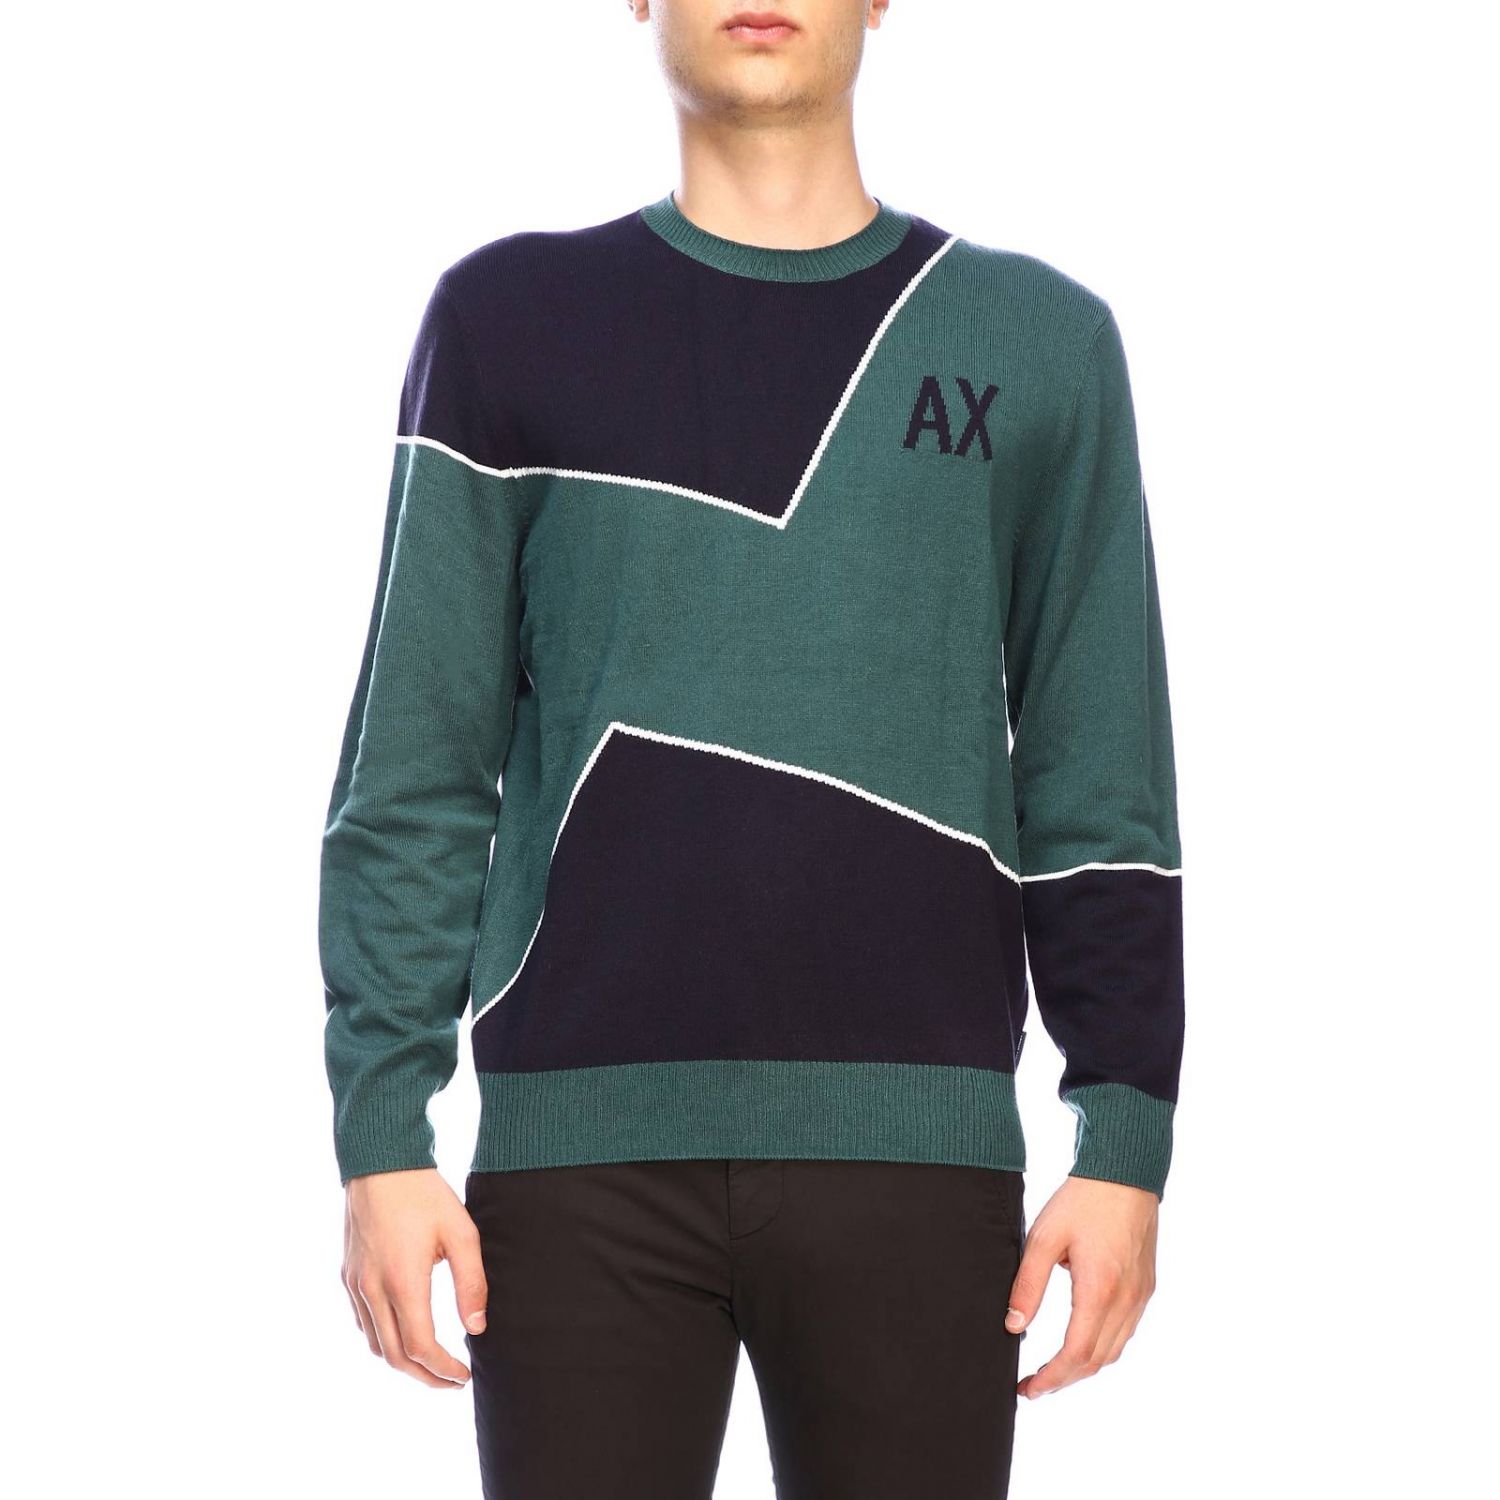 Armani Exchange Outlet: sweater for man - Green | Armani Exchange ...